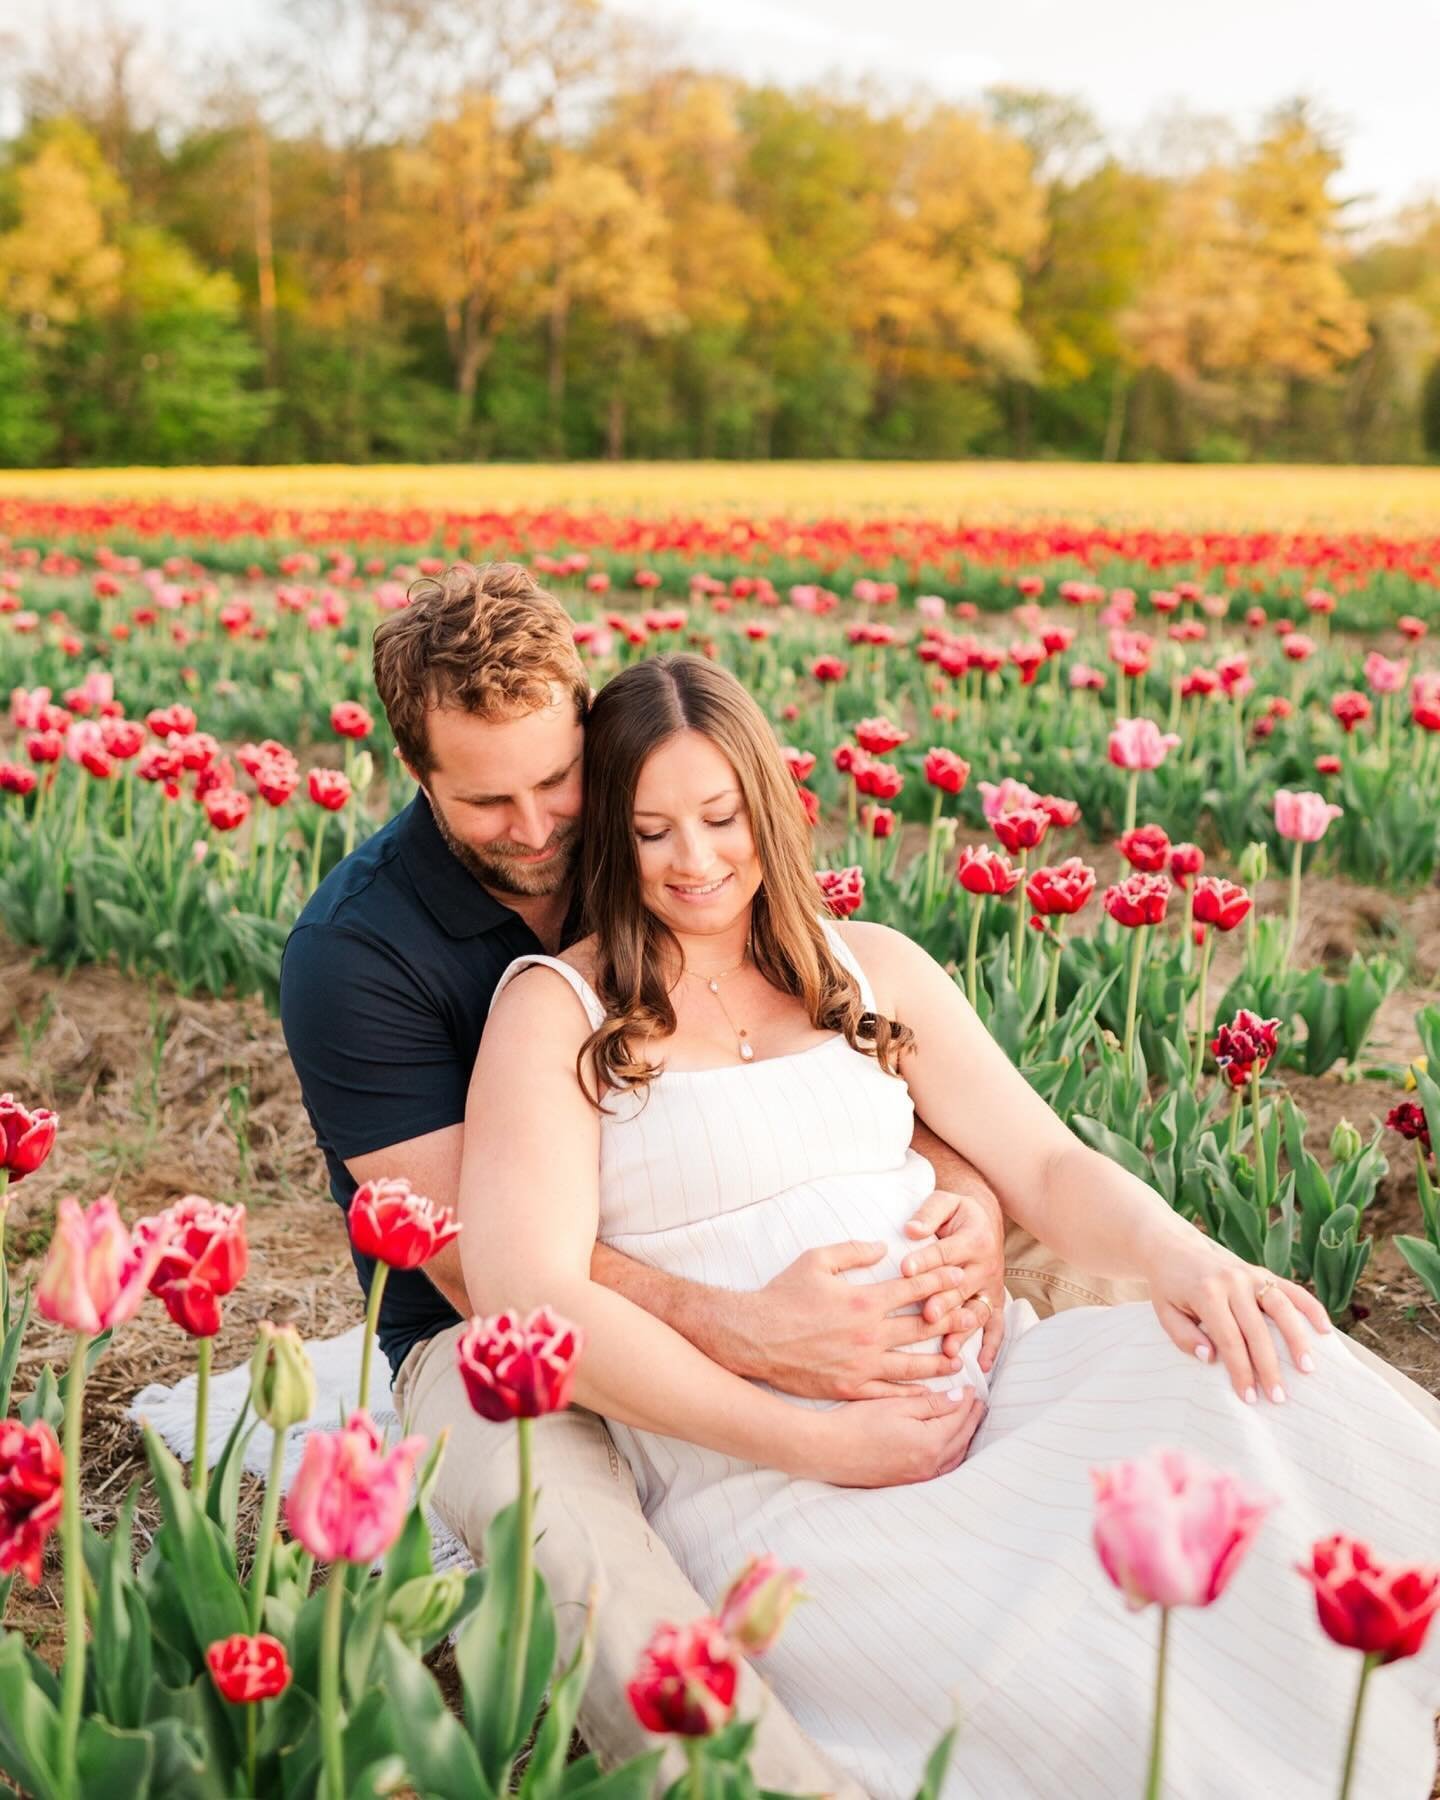 I am 😍 OBSESSED with Ashley + Gerad&rsquo;s tulip field maternity session at the beautiful @berkelbloem 🌷💕 

If you have the chance to go, check out the fields before the season&rsquo;s over&mdash;I highly recommend it! The owners are incredibly k